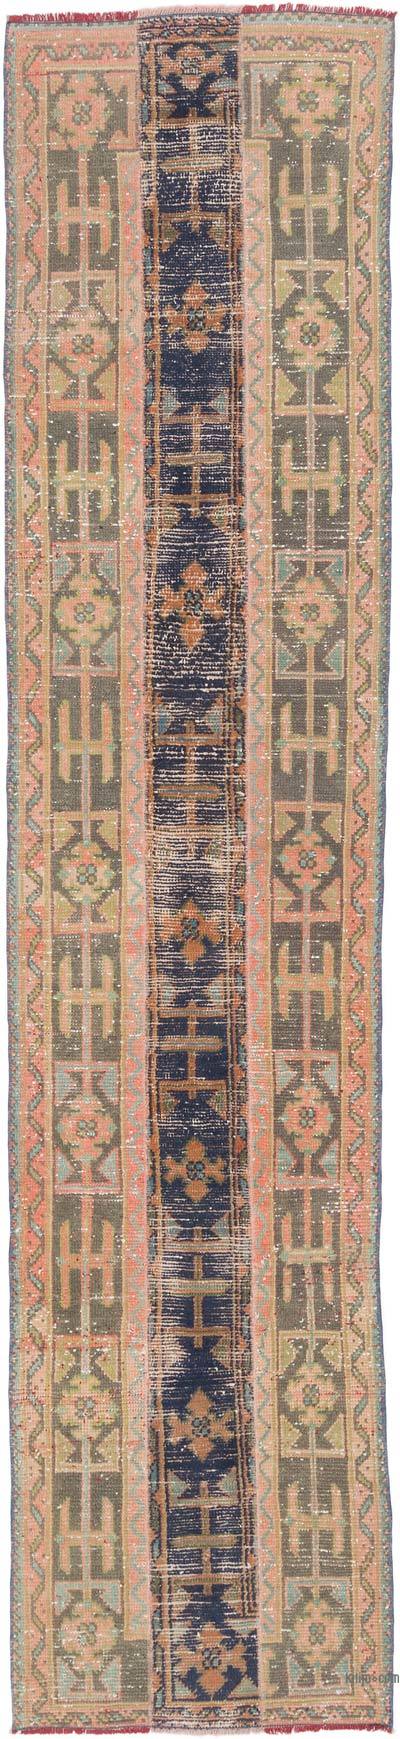 Vintage Turkish Hand-Knotted Runner - 2' 6" x 11' 1" (30 in. x 133 in.)